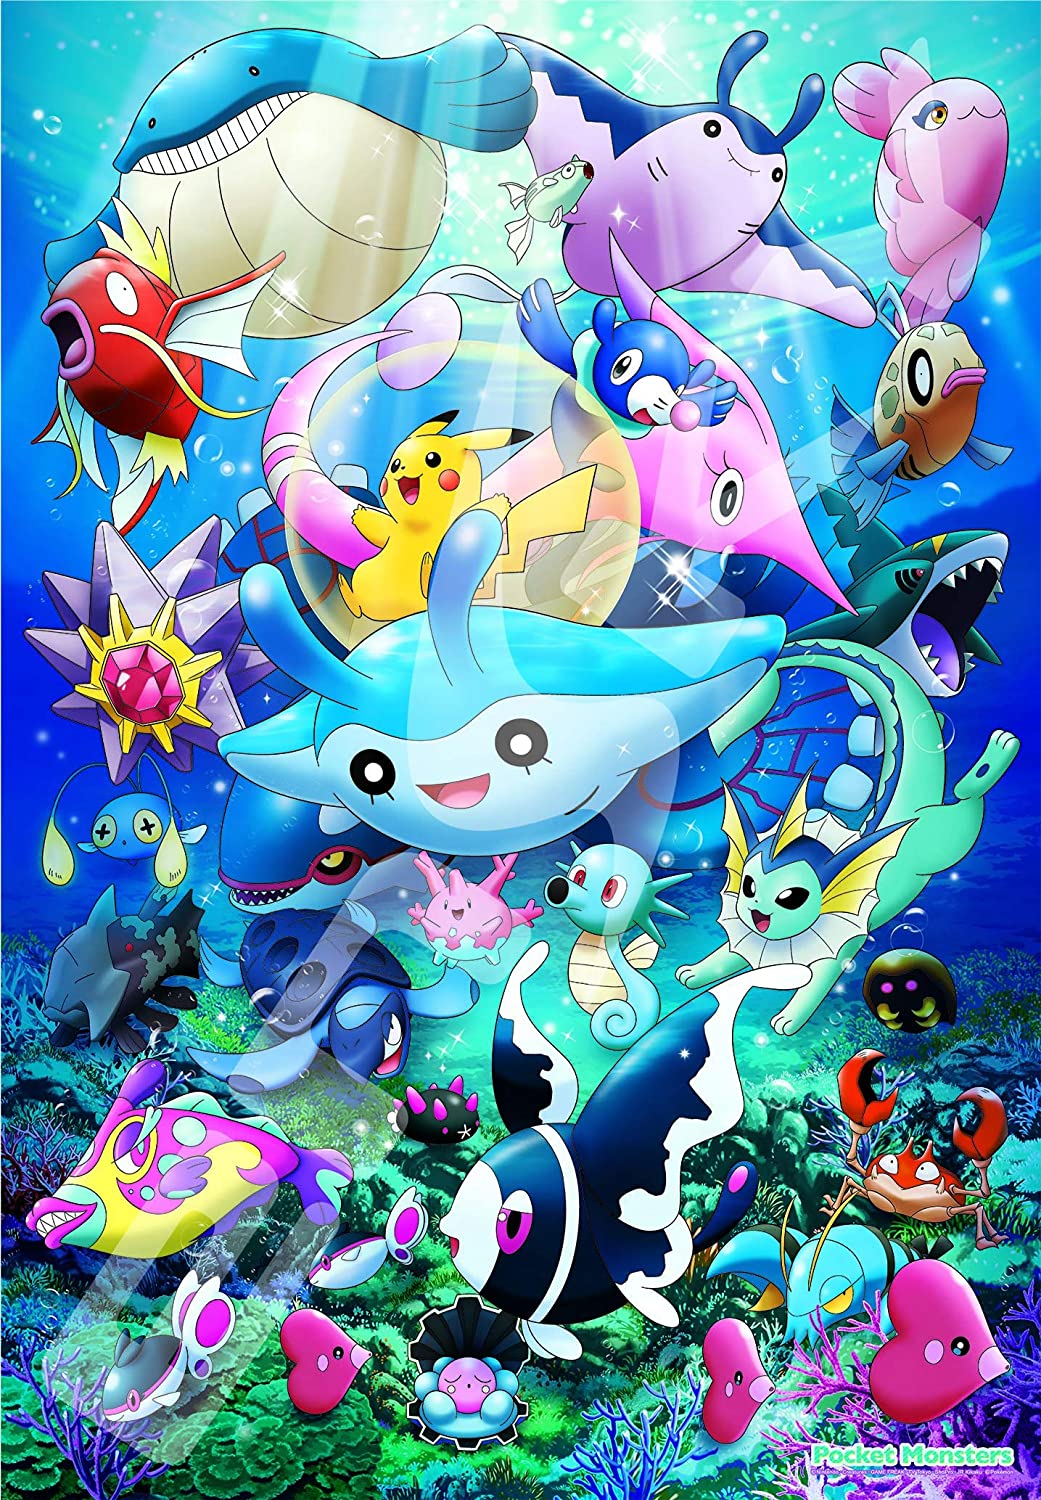 1000TPieces Puzzle Pokemon Umi and Friend (51x73.5cm) - Discovery Japan Mall